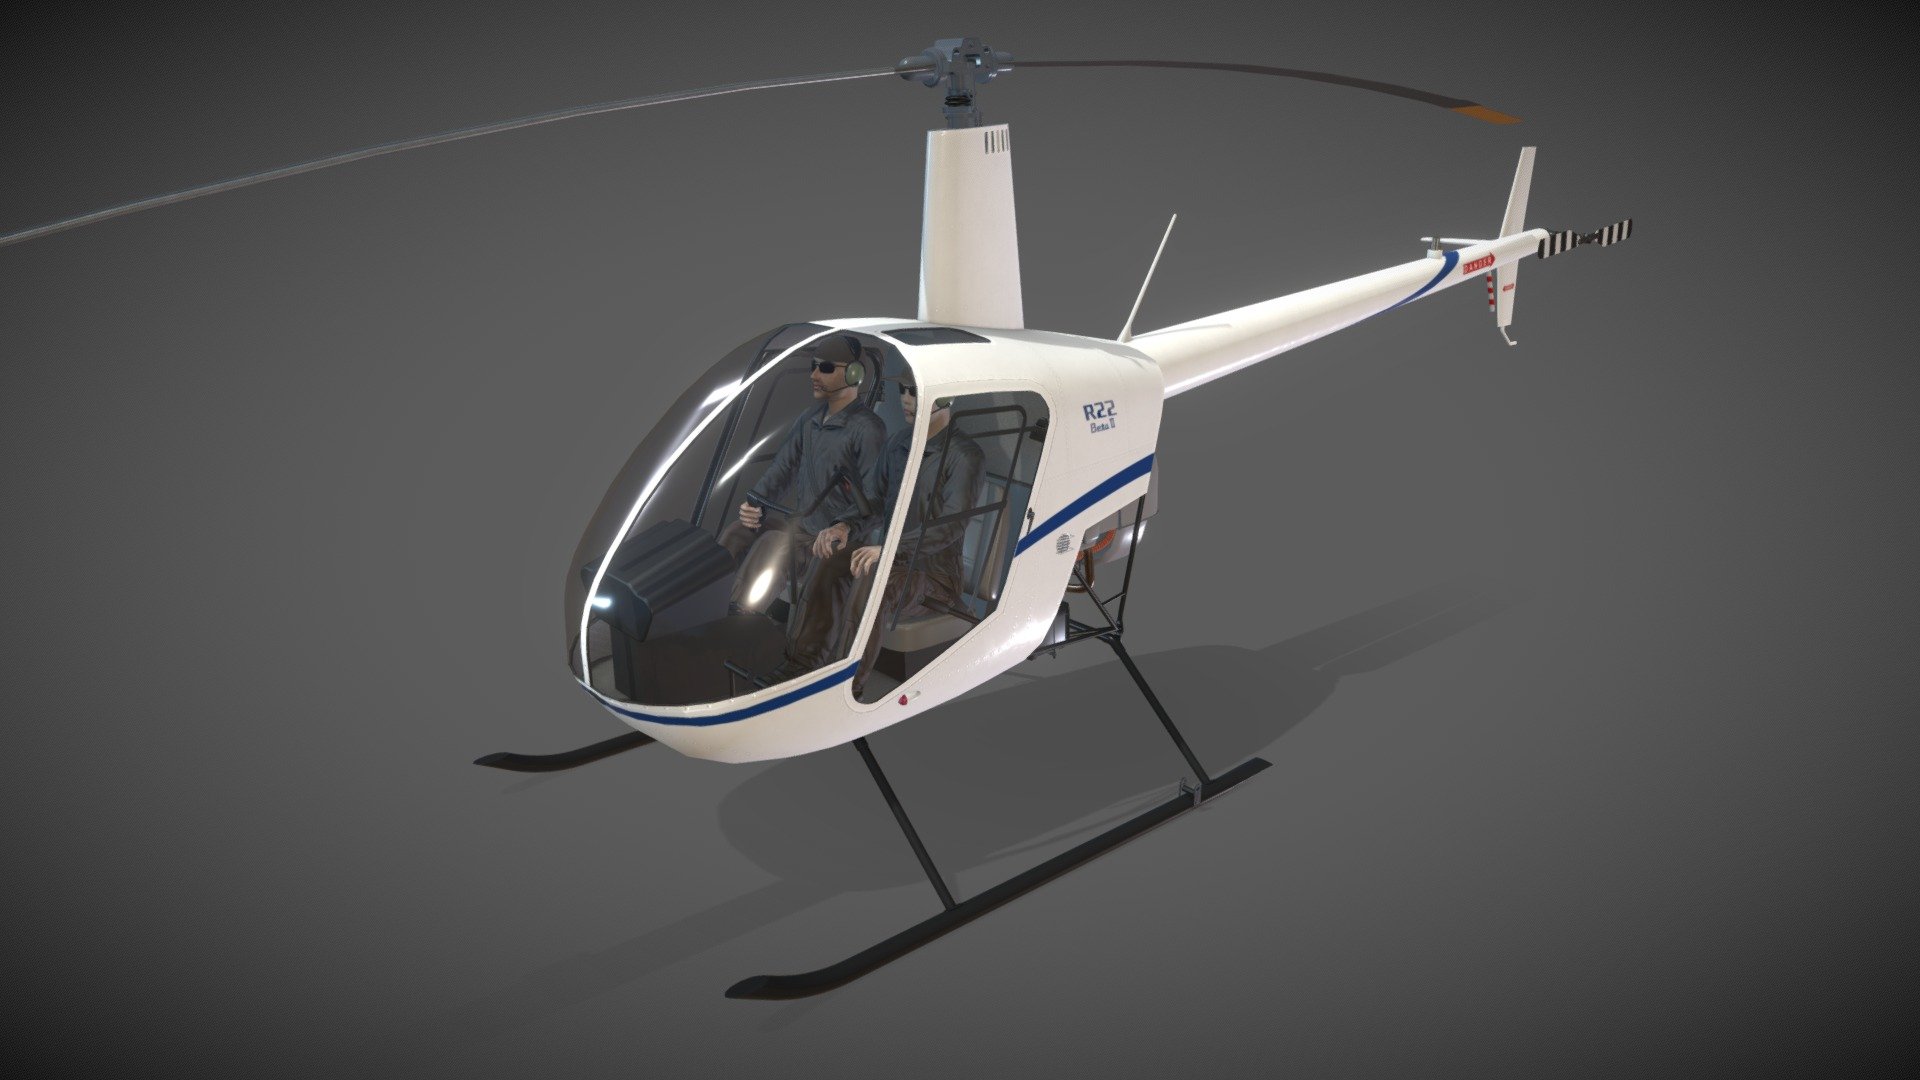 Robinson R22 Complex Animation



File formats: 3ds Max 2015, FBX, Unity 2020.3.25f1



This model contains 49 Animations (See dropdown list below the time line)

Photoshop file included. You can easily change livery color.

Static and Simple Animation versions are available as seperate models (see my profile models)

This model contains PNG textures(4096x4096):

-Base Color

-Metallness

-Roughness



-Diffuse

-Glossiness

-Specular



-Normal

-Ambient Occlusion - Robinson R22 White Complex Animation - Buy Royalty Free 3D model by pukamakara 3d model